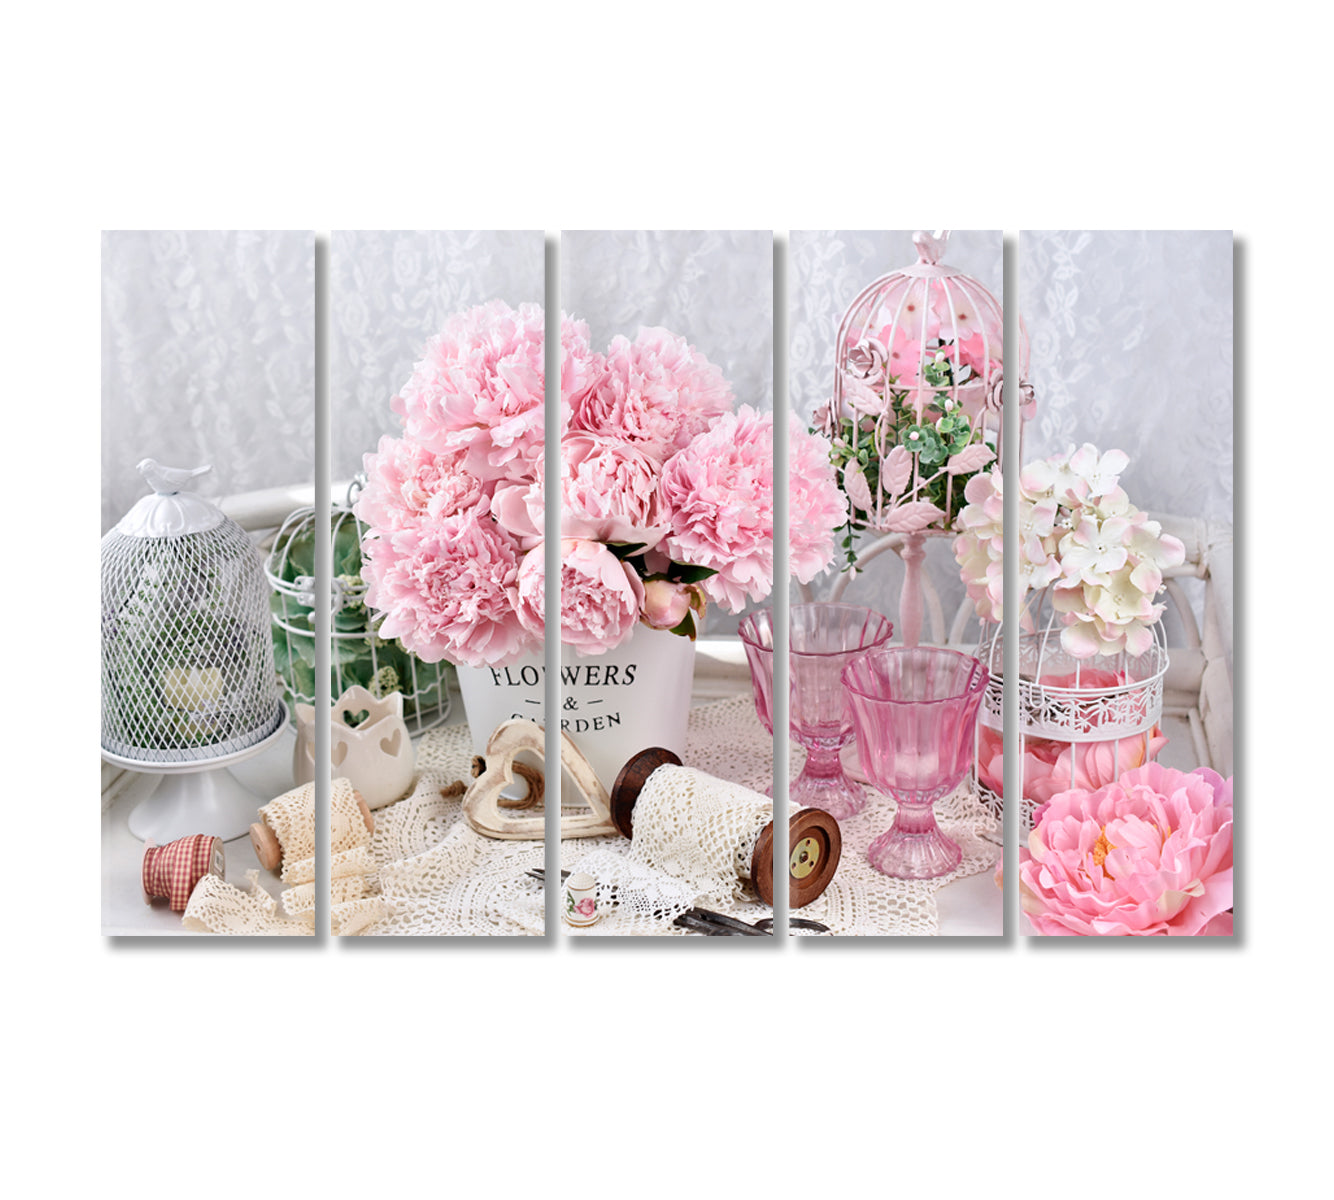 Peony Flowers in Shabby Chic Style Canvas Print-Canvas Print-CetArt-5 Panels-36x24 inches-CetArt